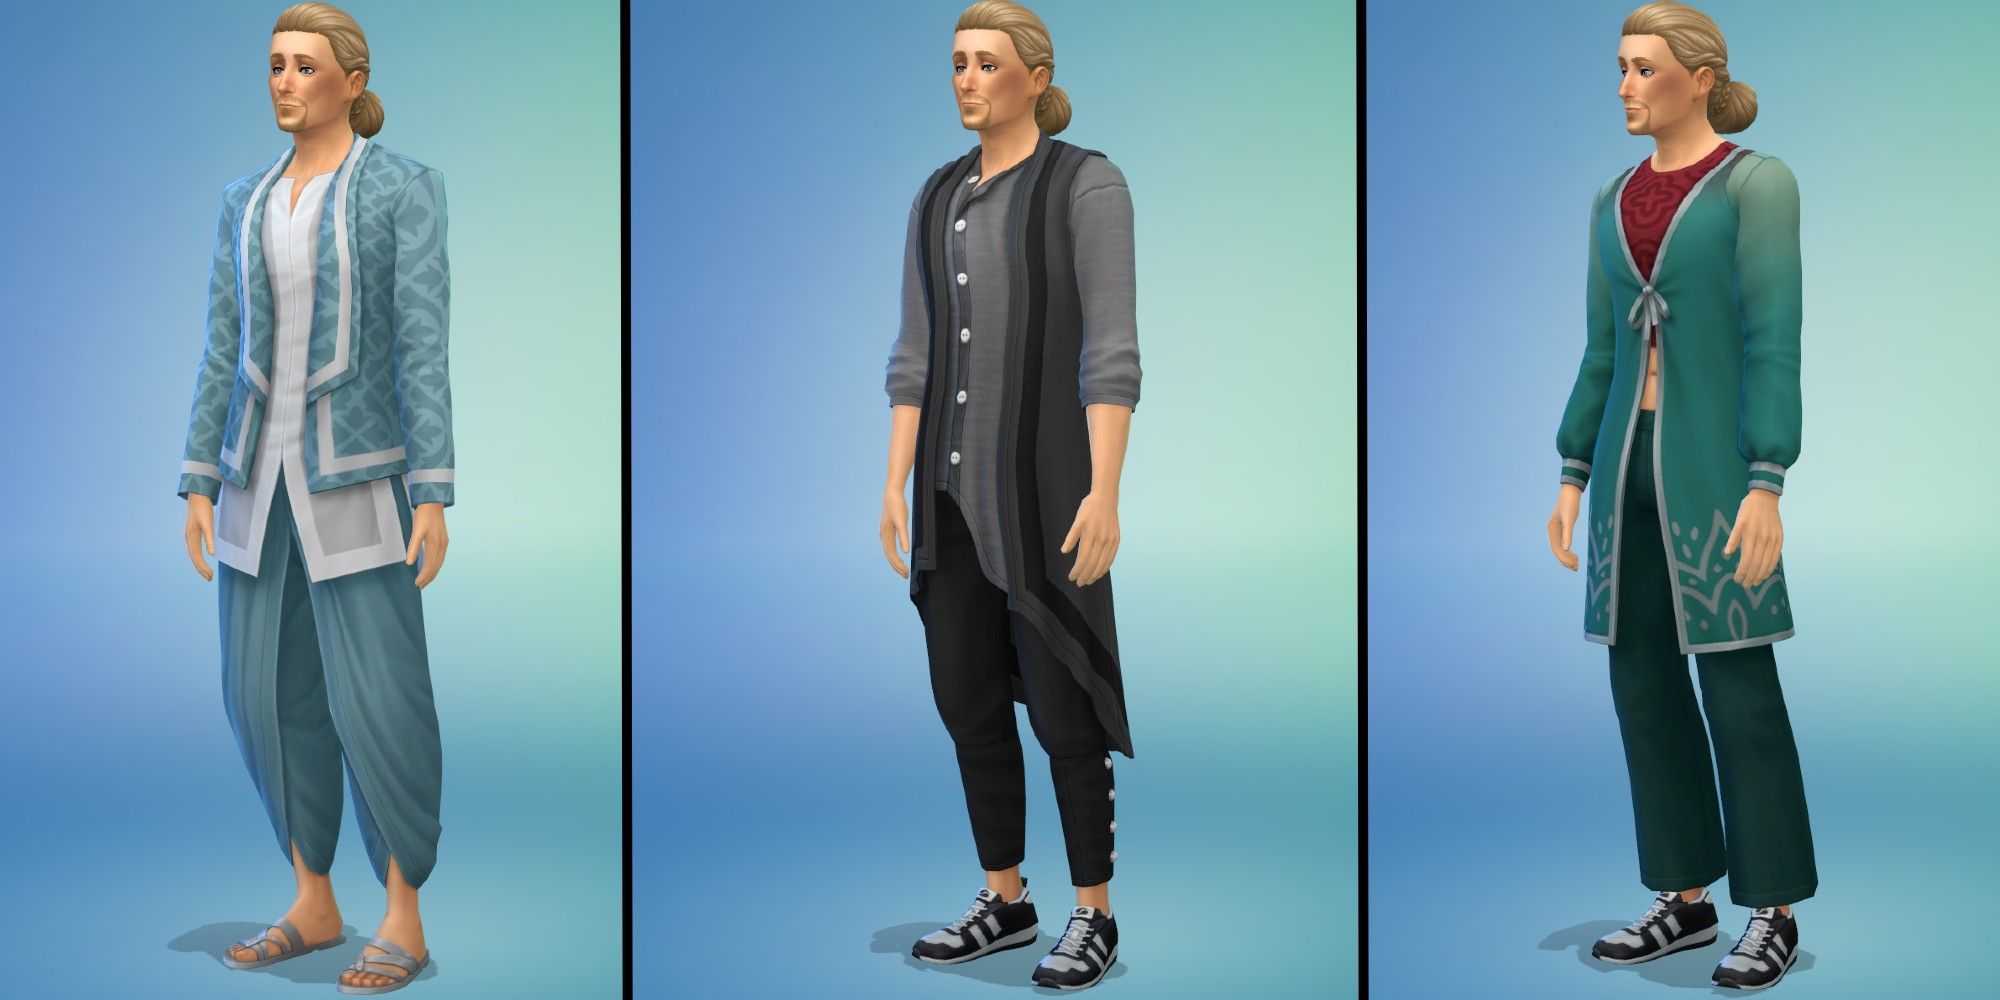 Sims 4: Fashion Steet Kit, Masculine Full-body Outfits with default swatches, in the CAS Screen